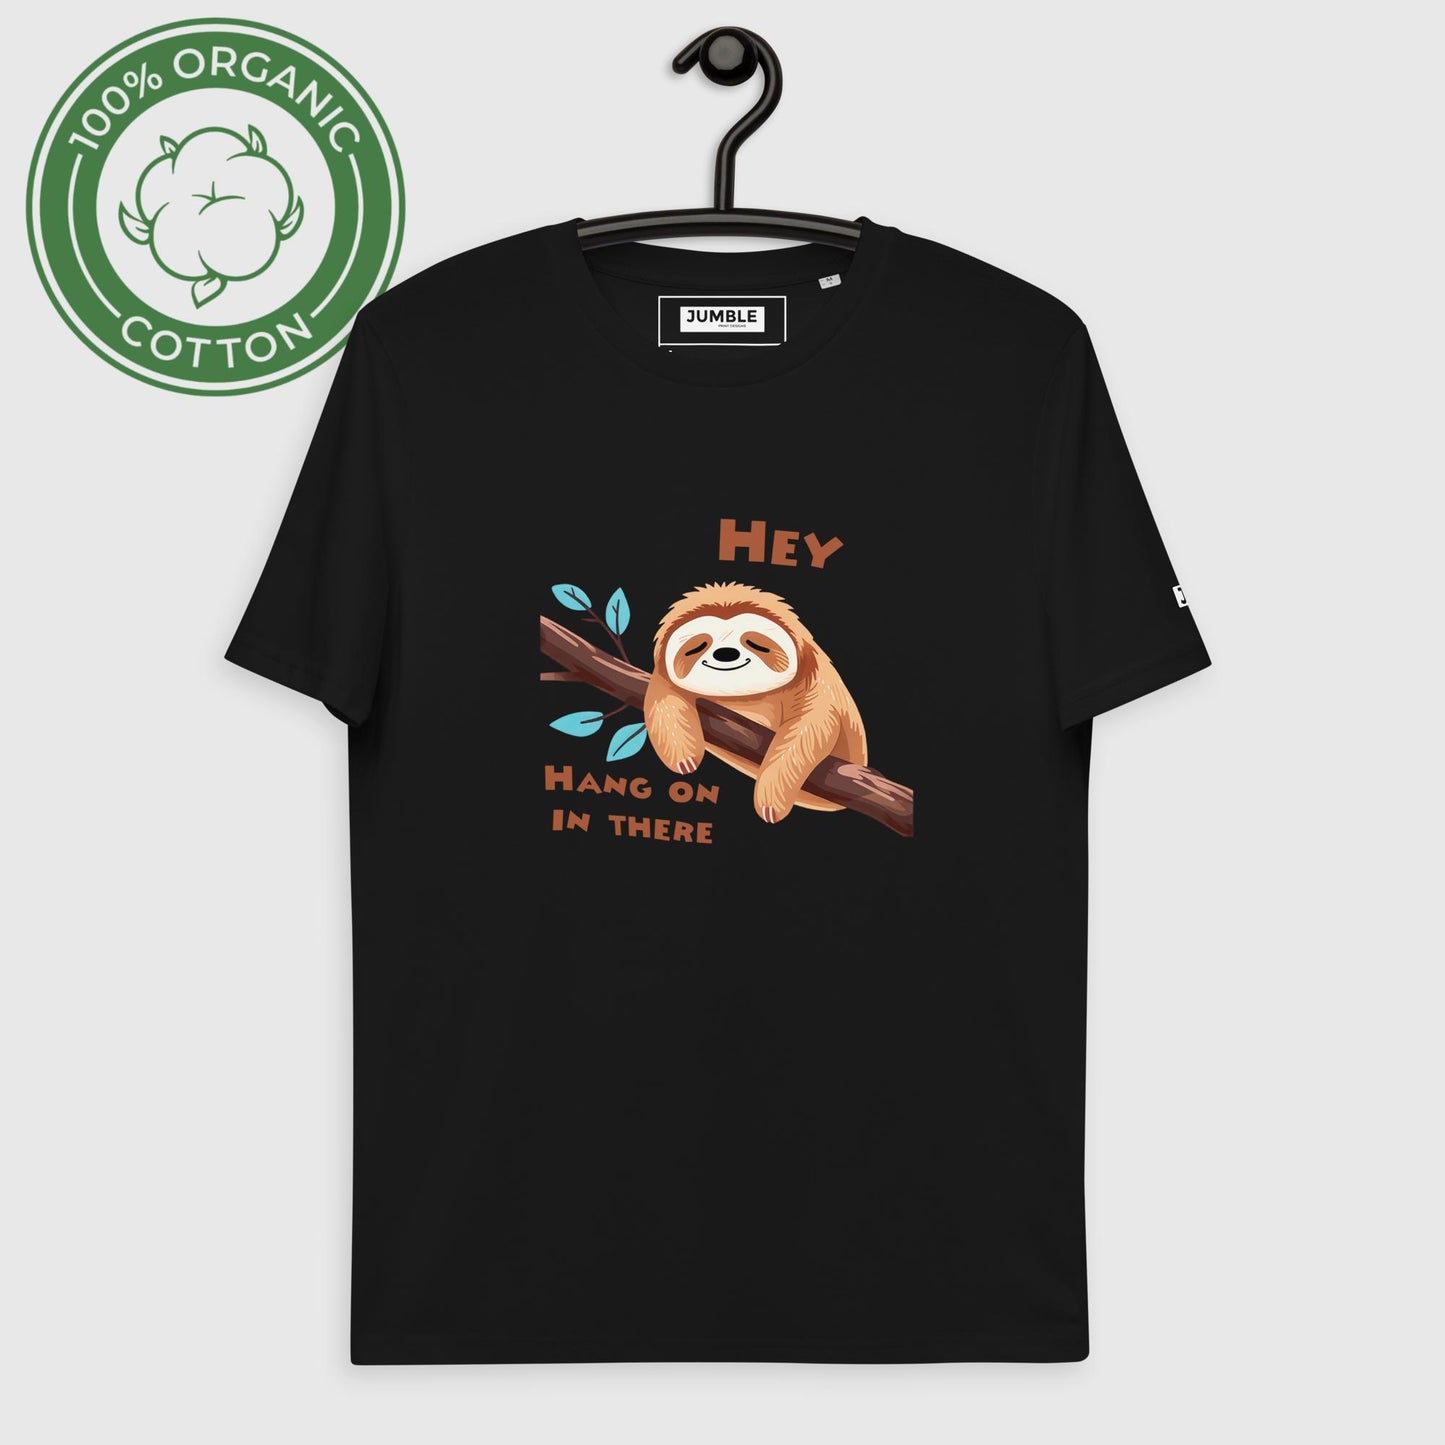 Hey, Hang on in their Unisex organic cotton t-shirt, in black. On hanger